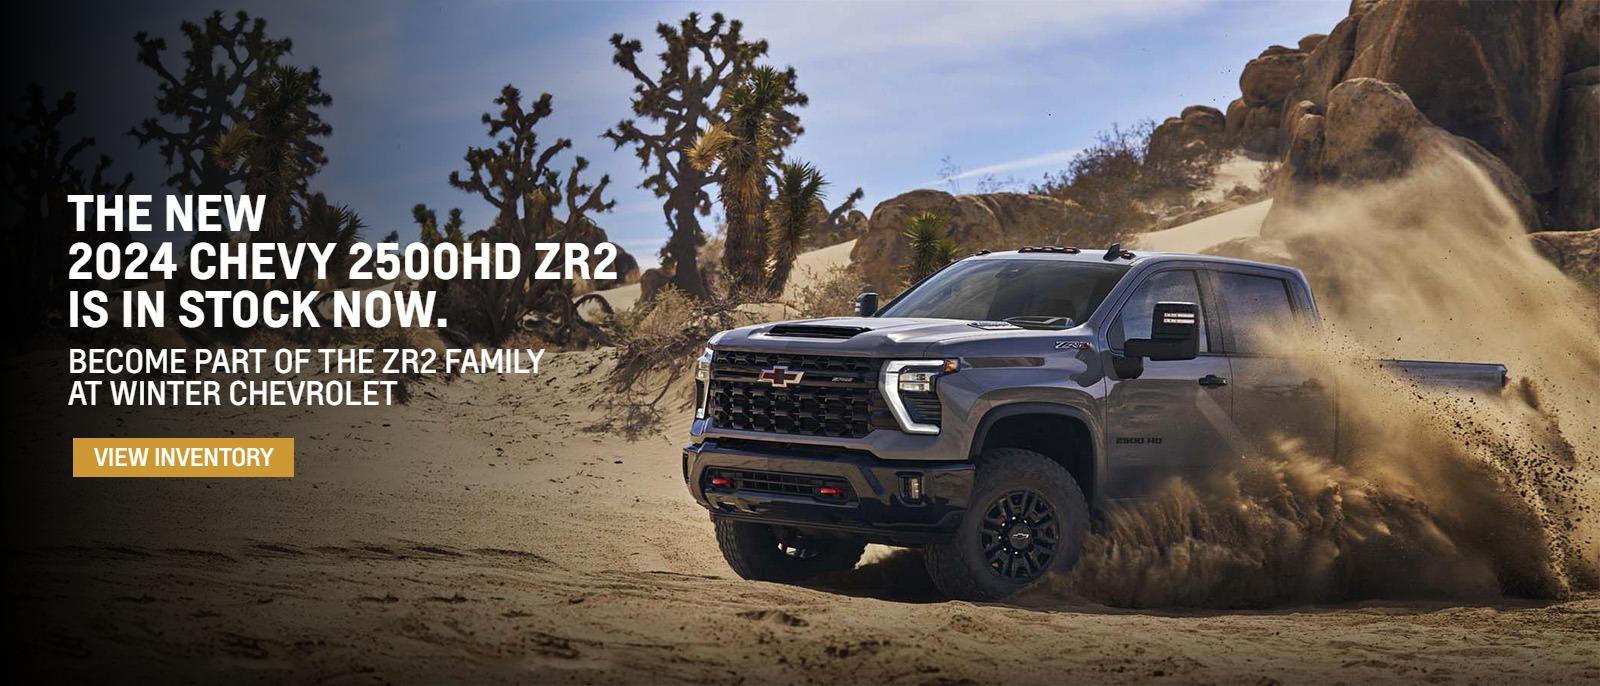 The New 2024 Chevy 2500HD ZR2 is in stock Now. Become Part of the ZR2 Family at Winter Chevrolet